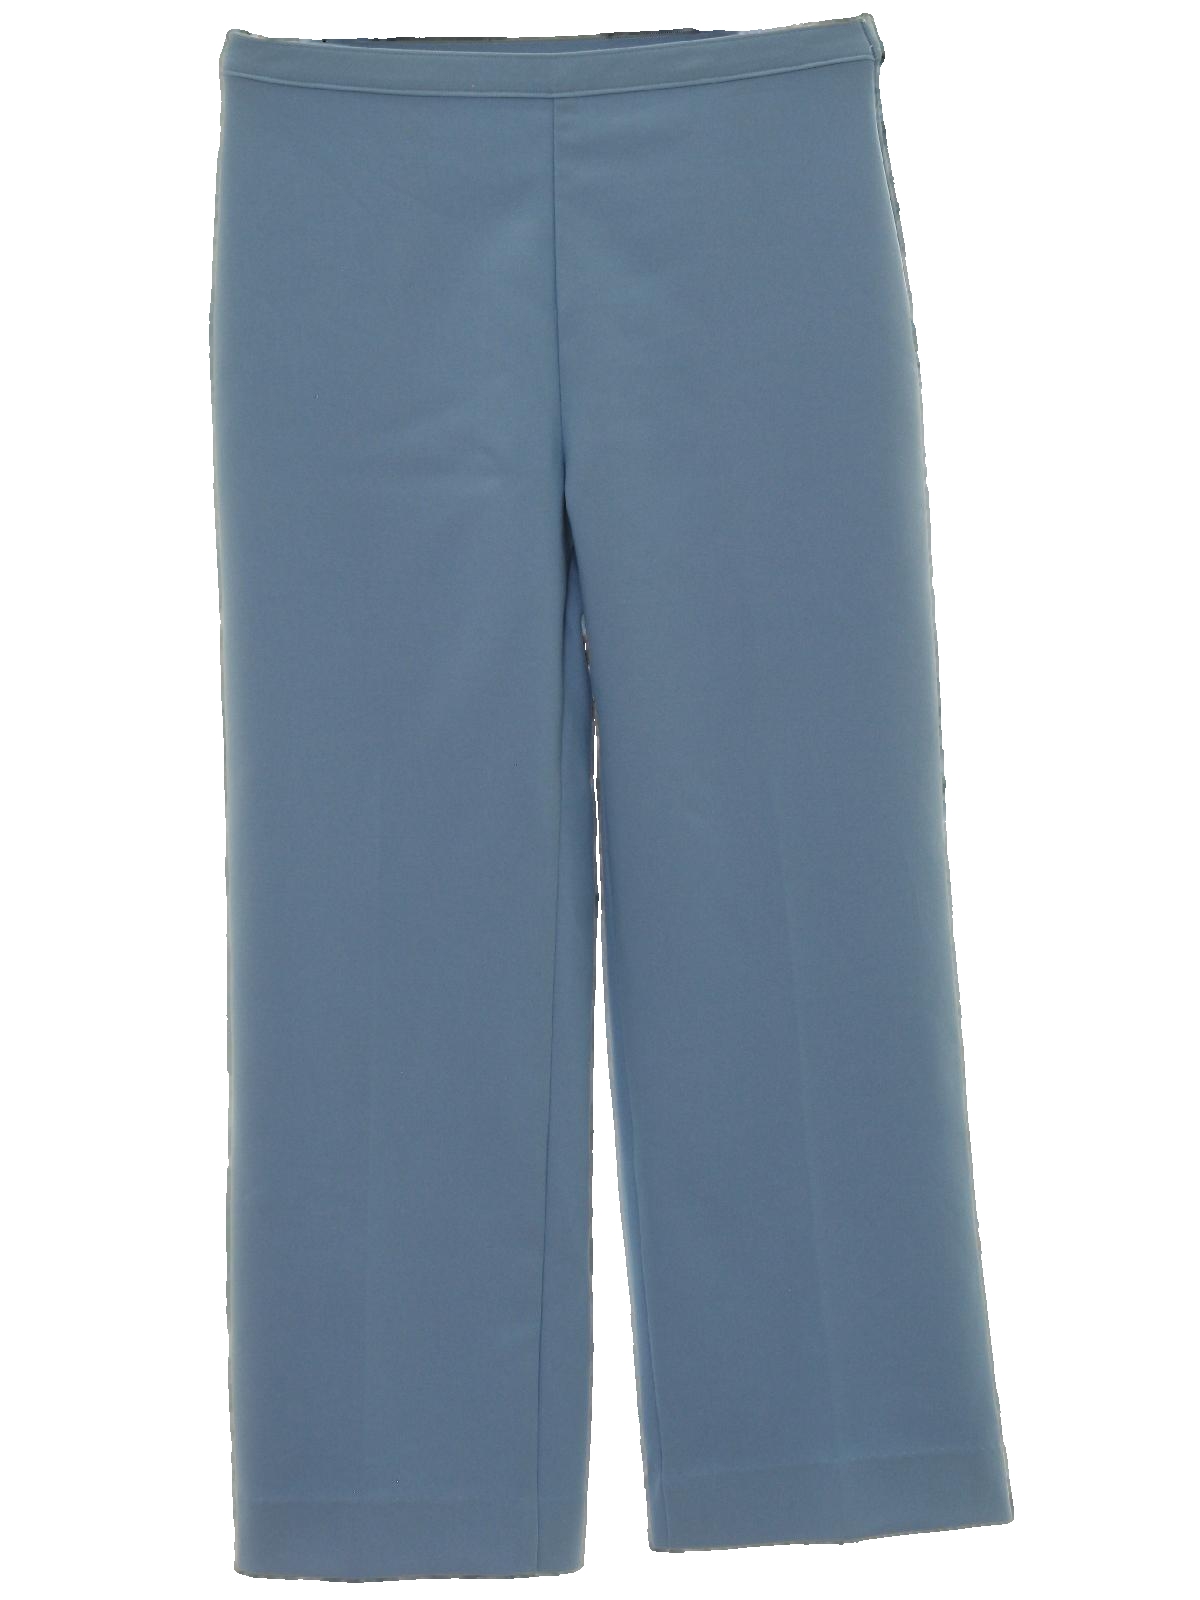 Vintage 80s Pants: Early 80s -Levis Strauss- Womens light sky blue  polyester gabardine pants. Classic straight leg style with banded pull on  waist.